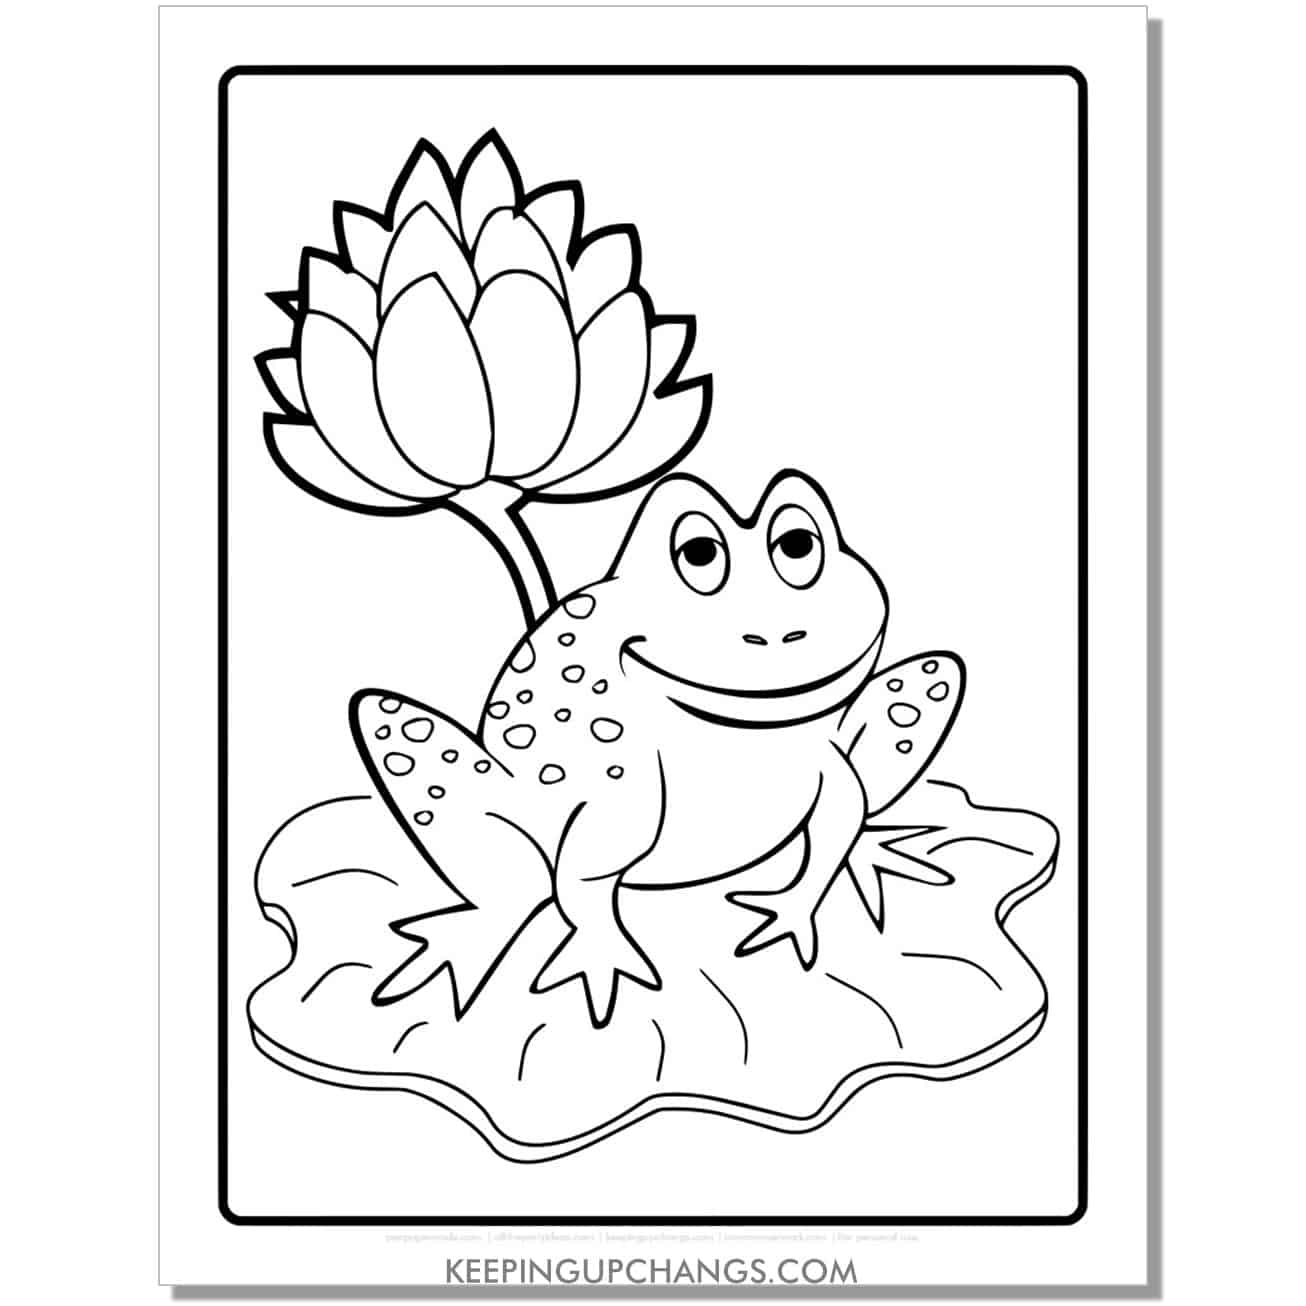 free sleepy frog coloring page, sheet with lotus flower.